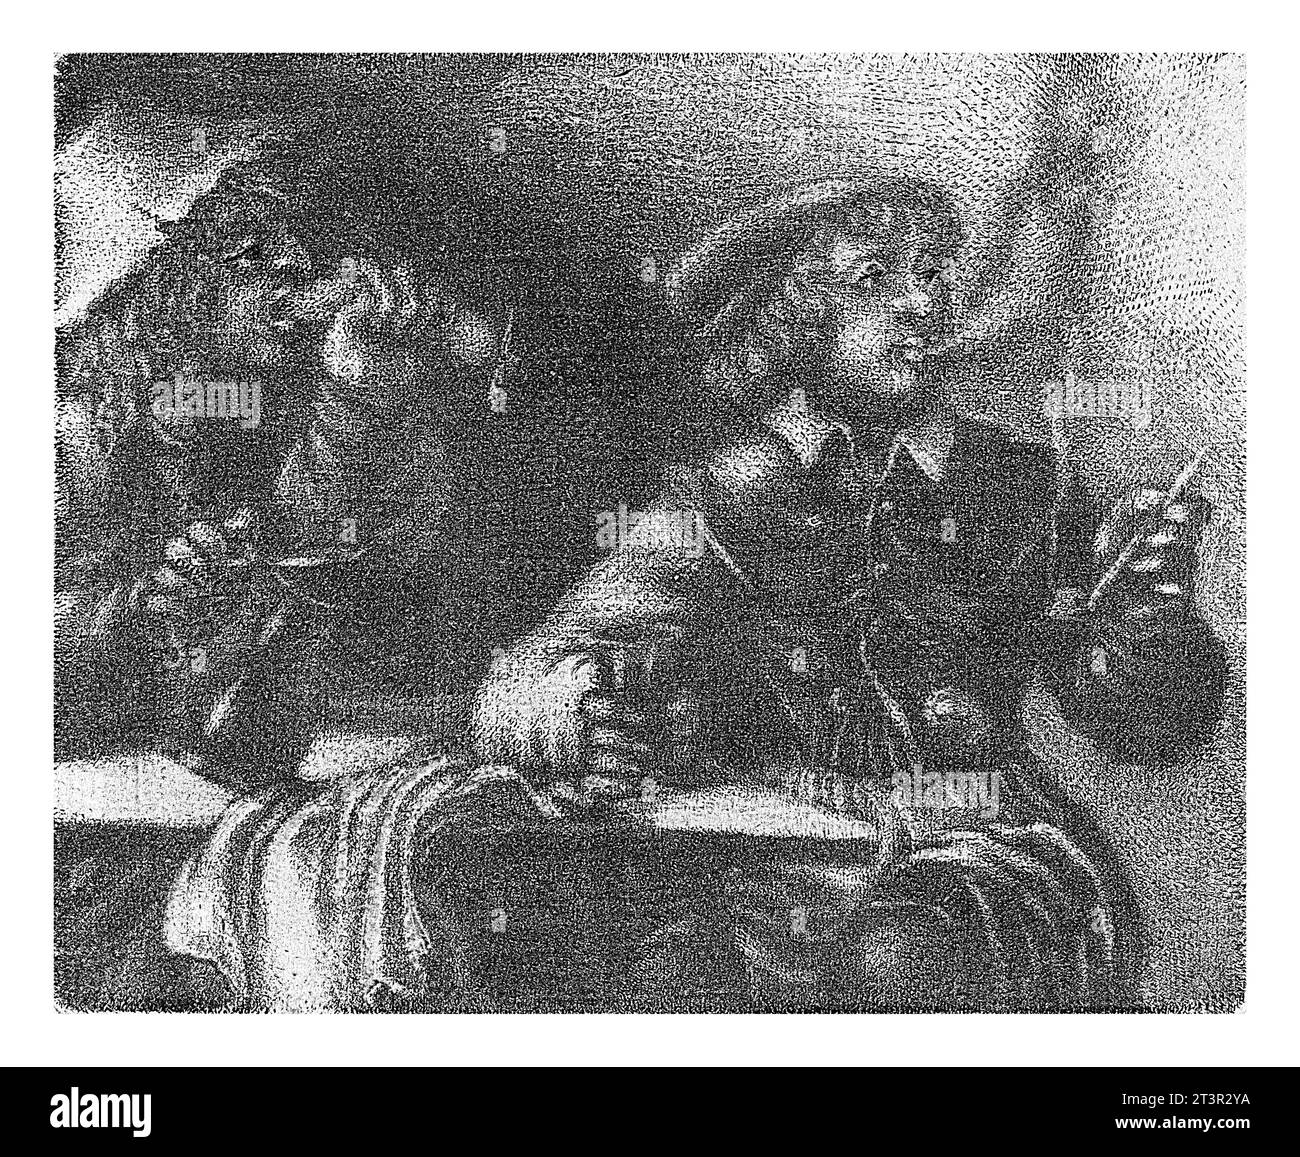 Smoking and Eating Men, Jacobus Harrewijn, 1690 De Smaak. Two men sit at a table smoking and drinking. One of the men sinks his teeth into a sausage. Stock Photo